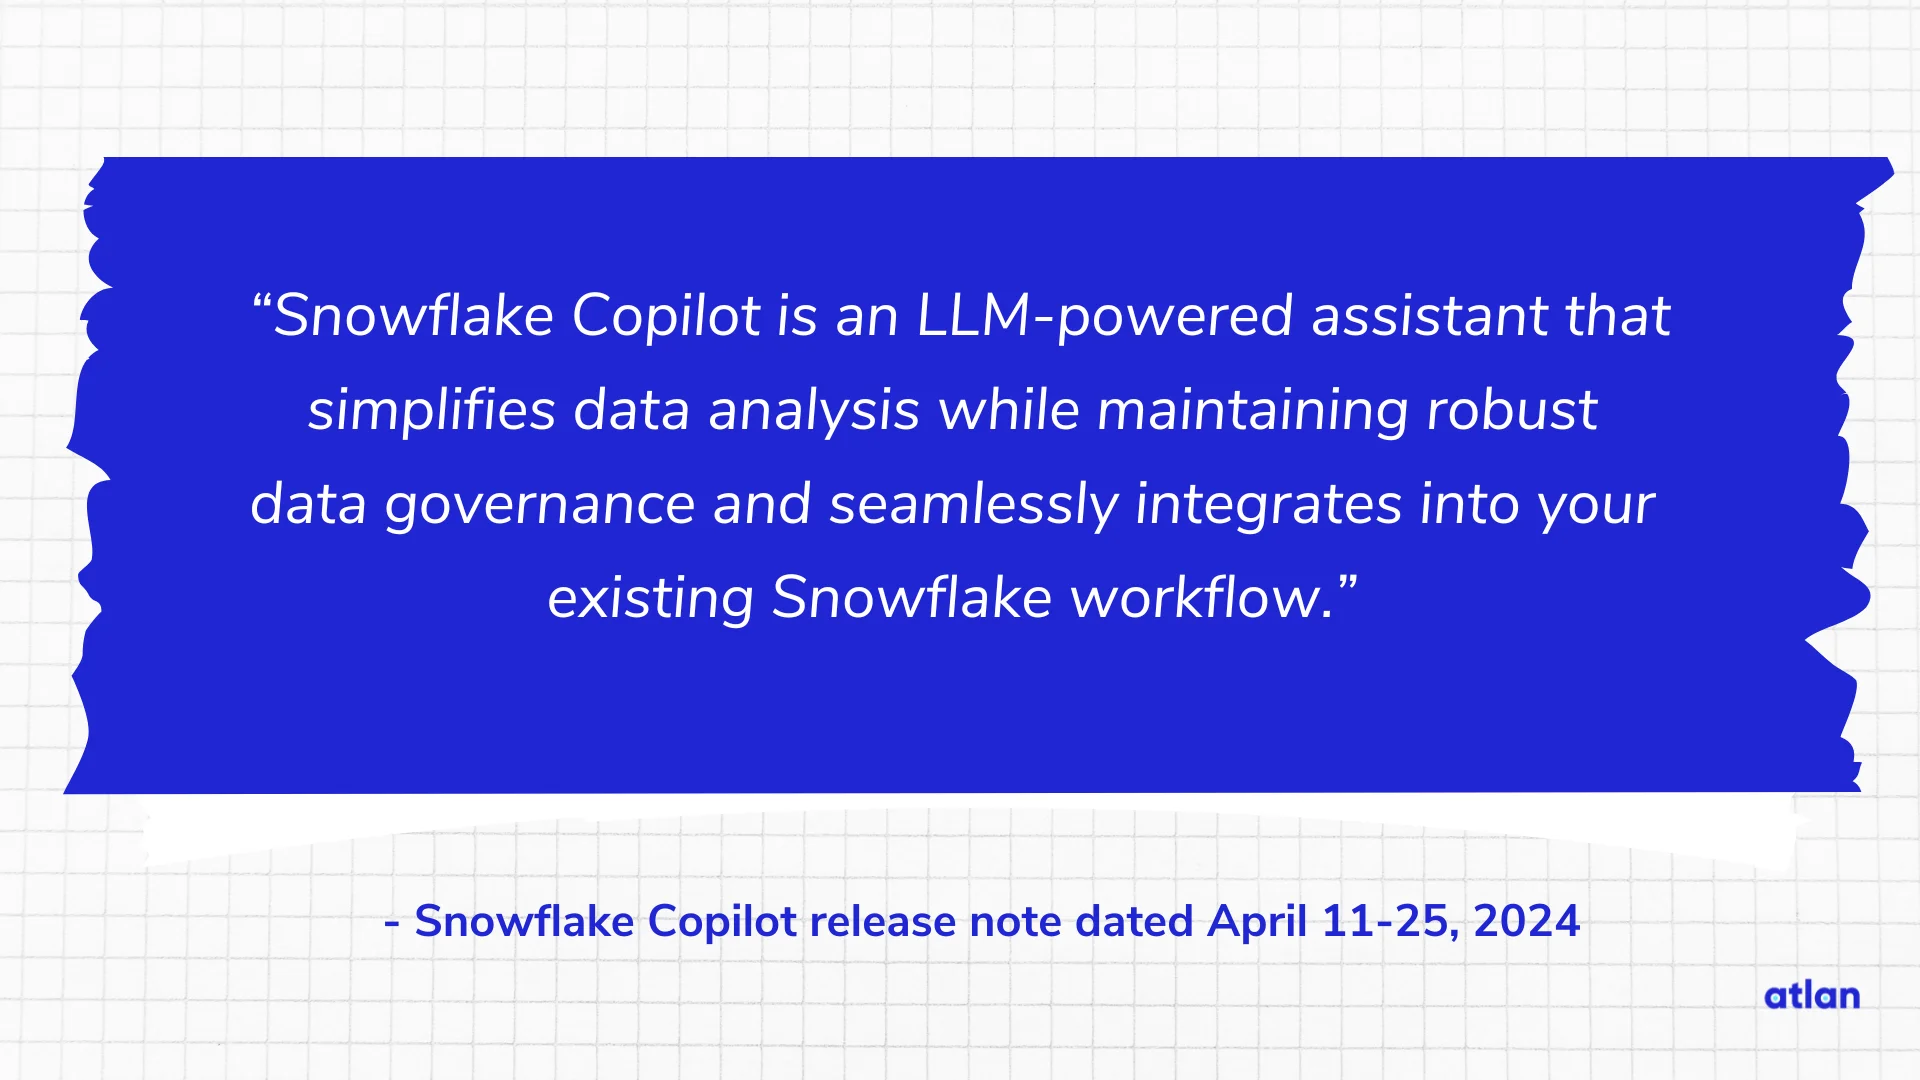 Snowflake Copilot is an LLM-powered assistant